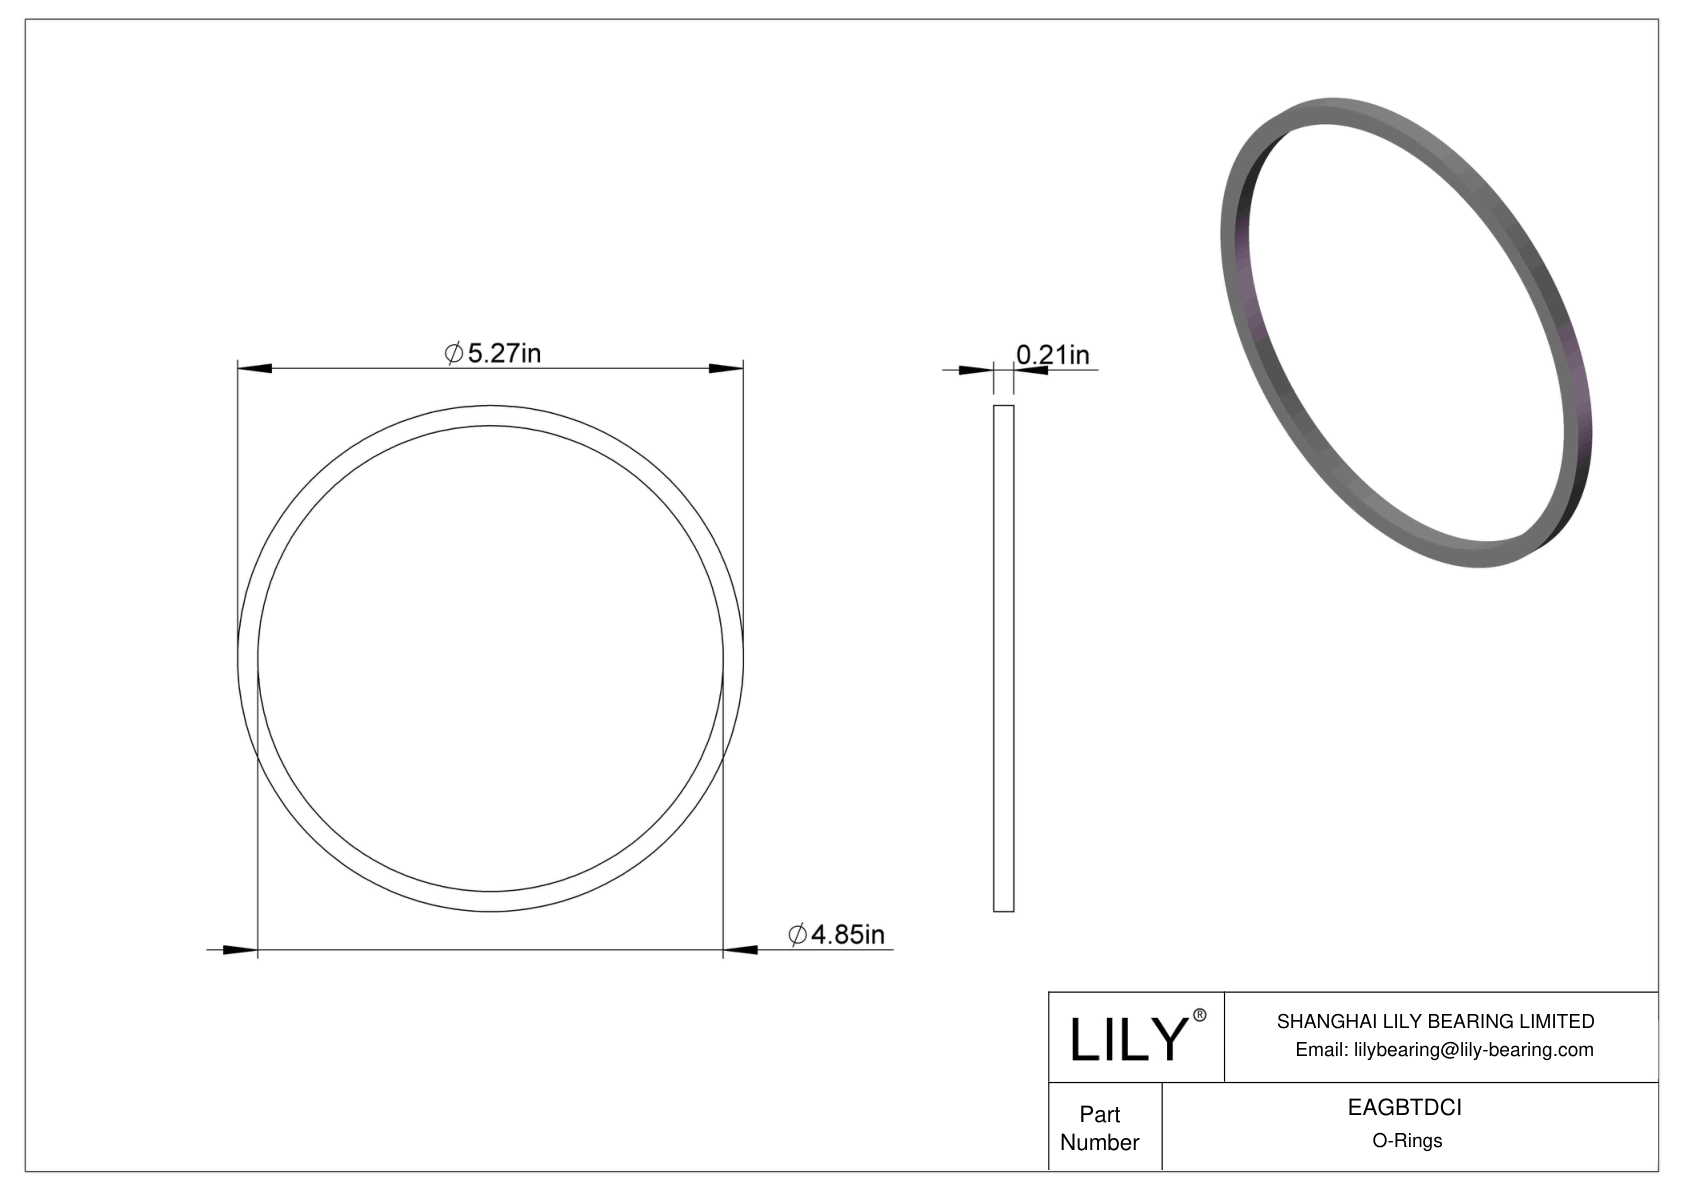 EAGBTDCI Oil Resistant O-Rings Square cad drawing